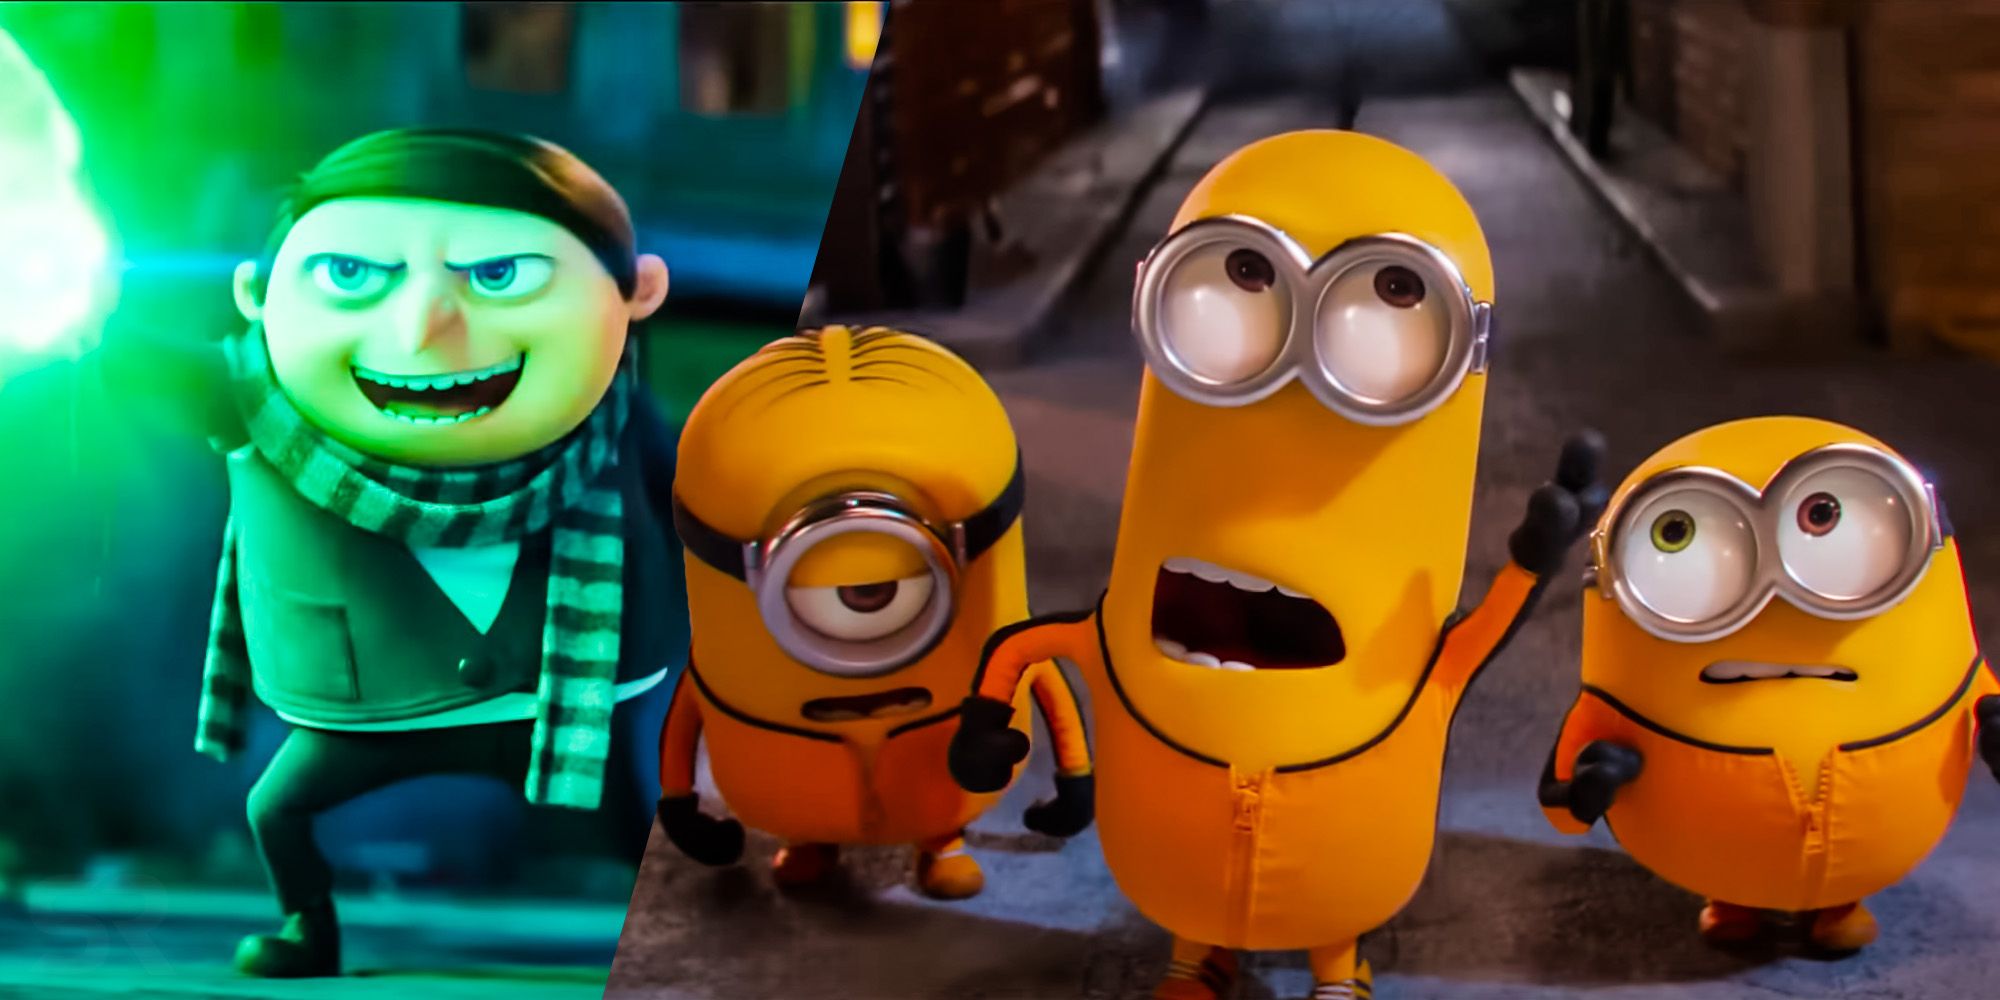 Steve Carell Wants To Cast His Famous Friend In The Next Minions Movie